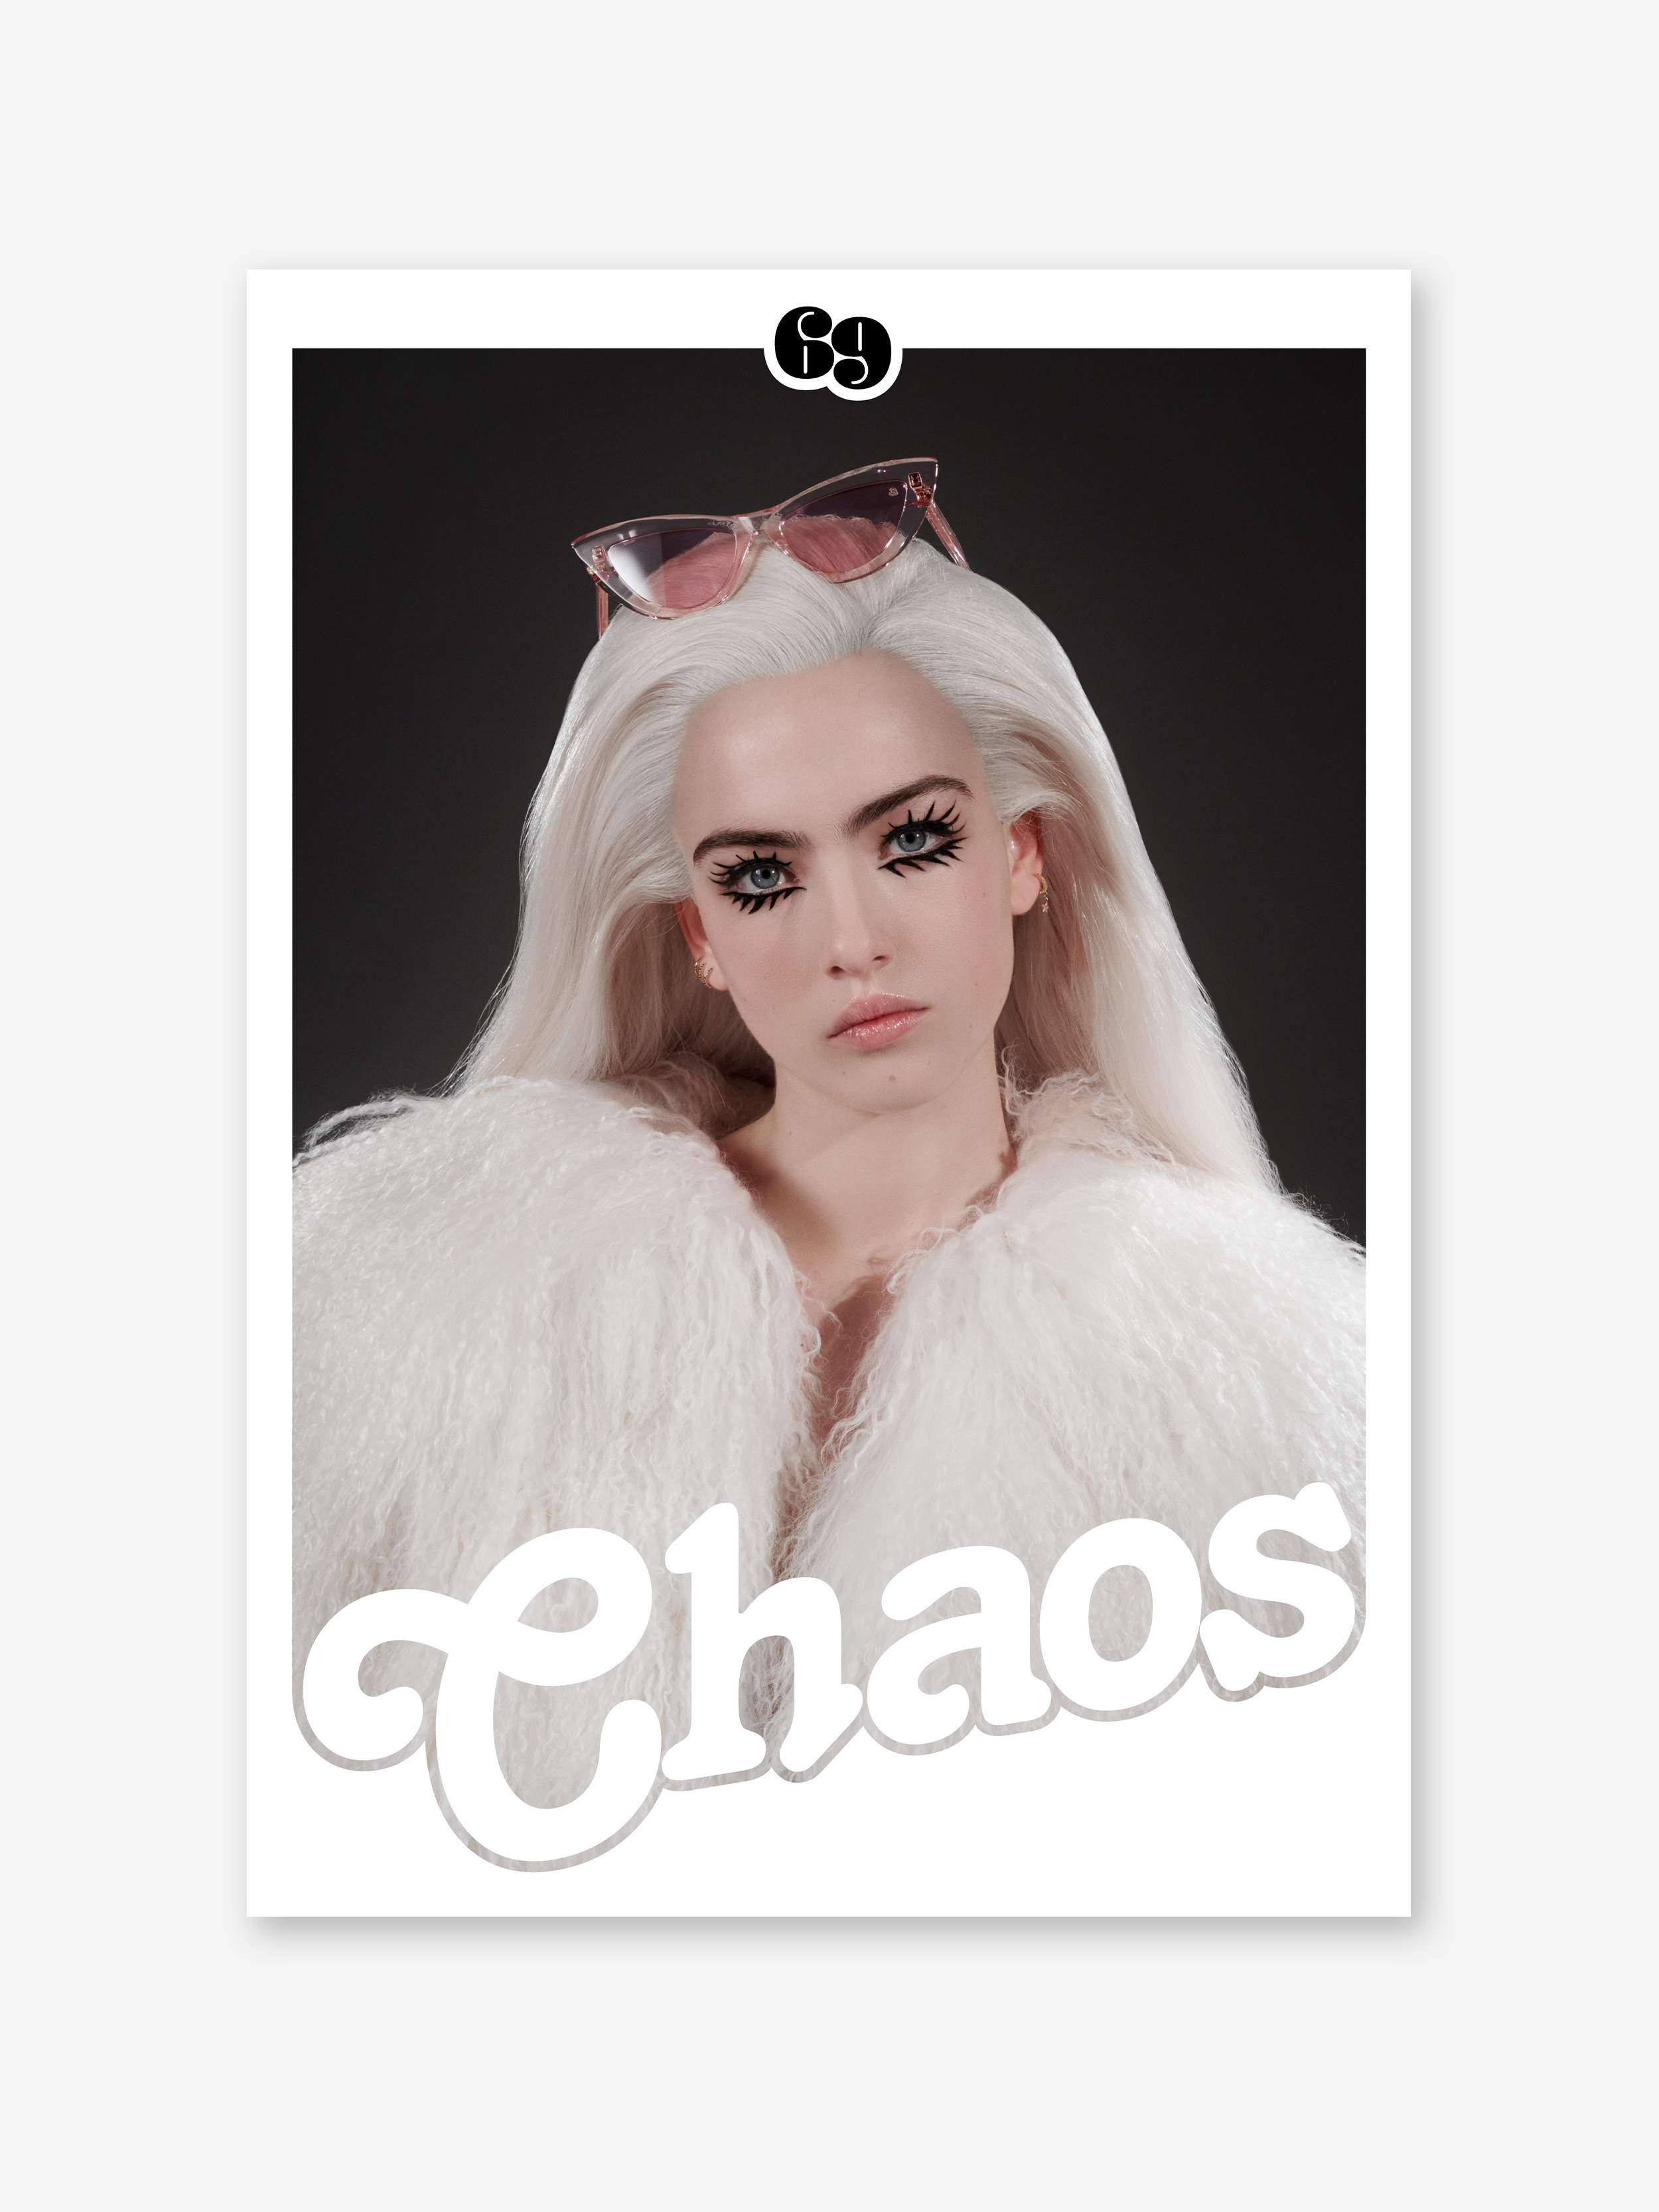 Chaos SixtyNine Issue 6 Mini Edition - Poster and Stationery Set, Stella Jones cover.